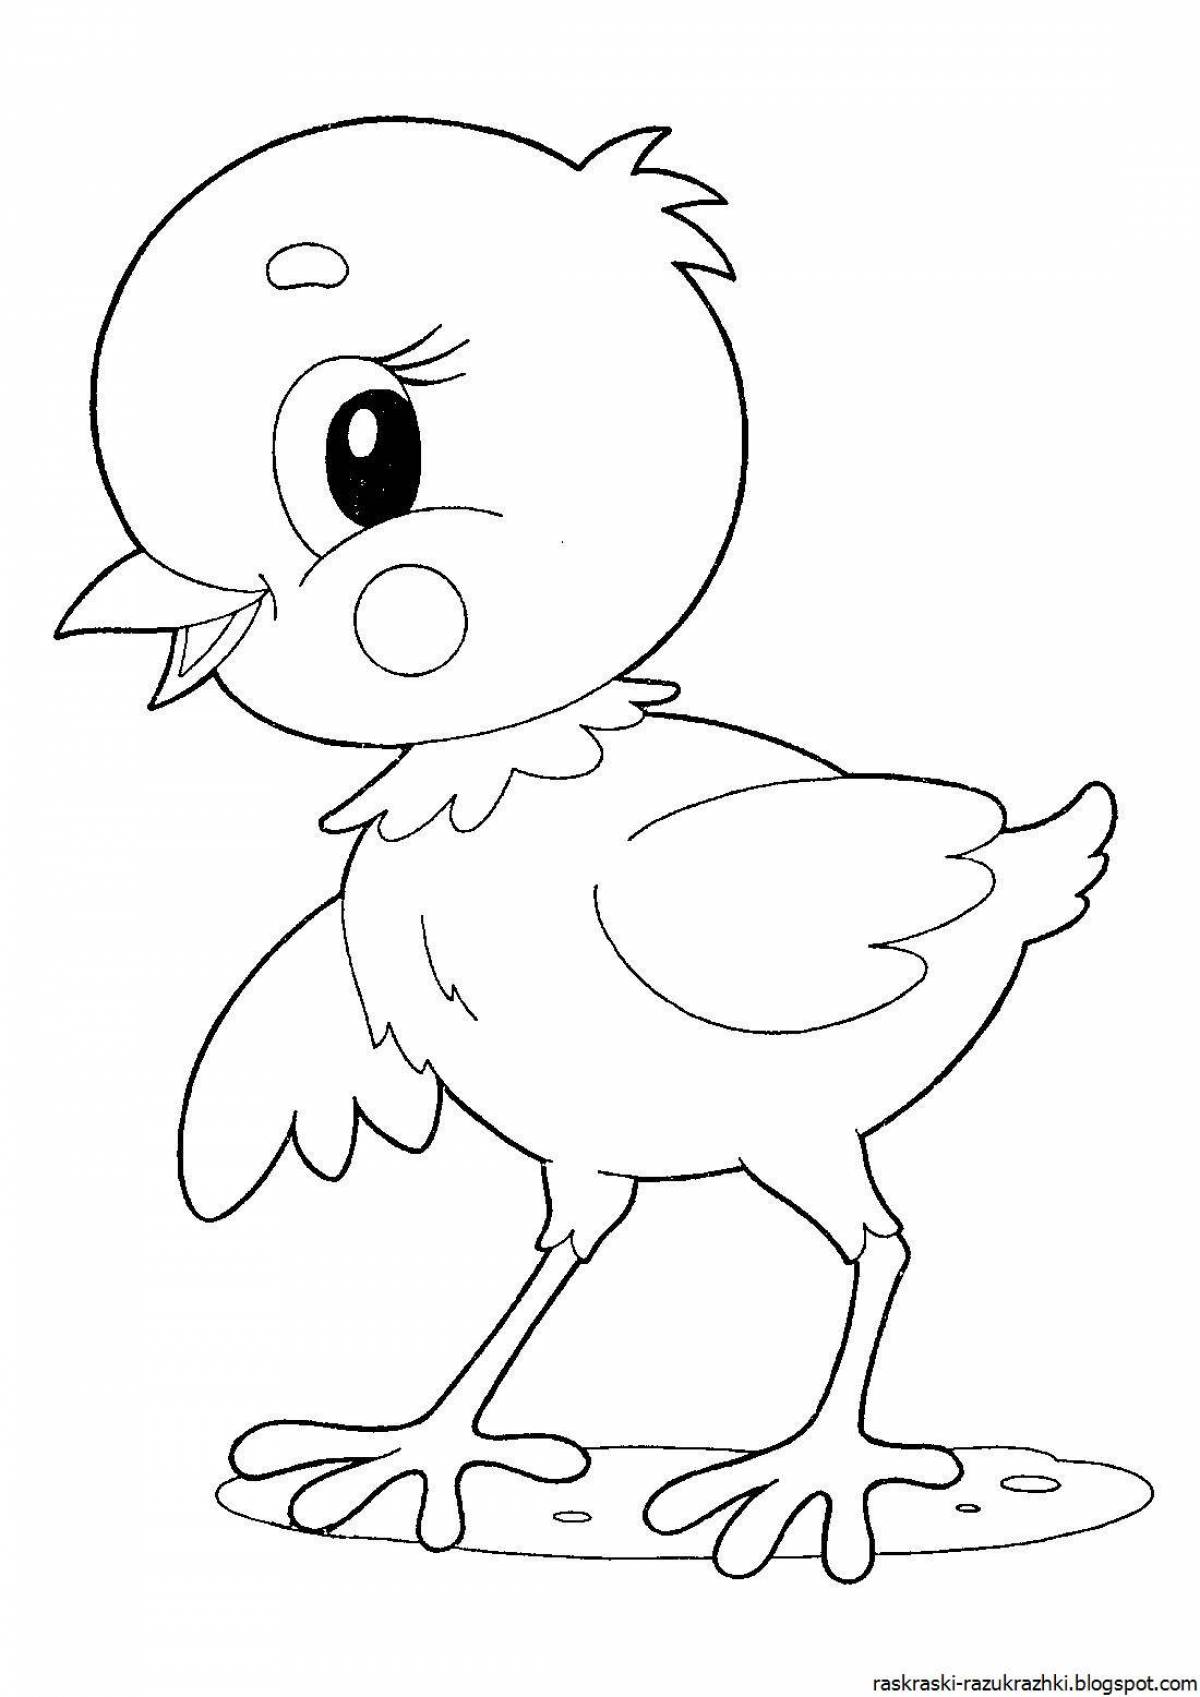 Coloring pages with bright chicks for children 2-3 years old